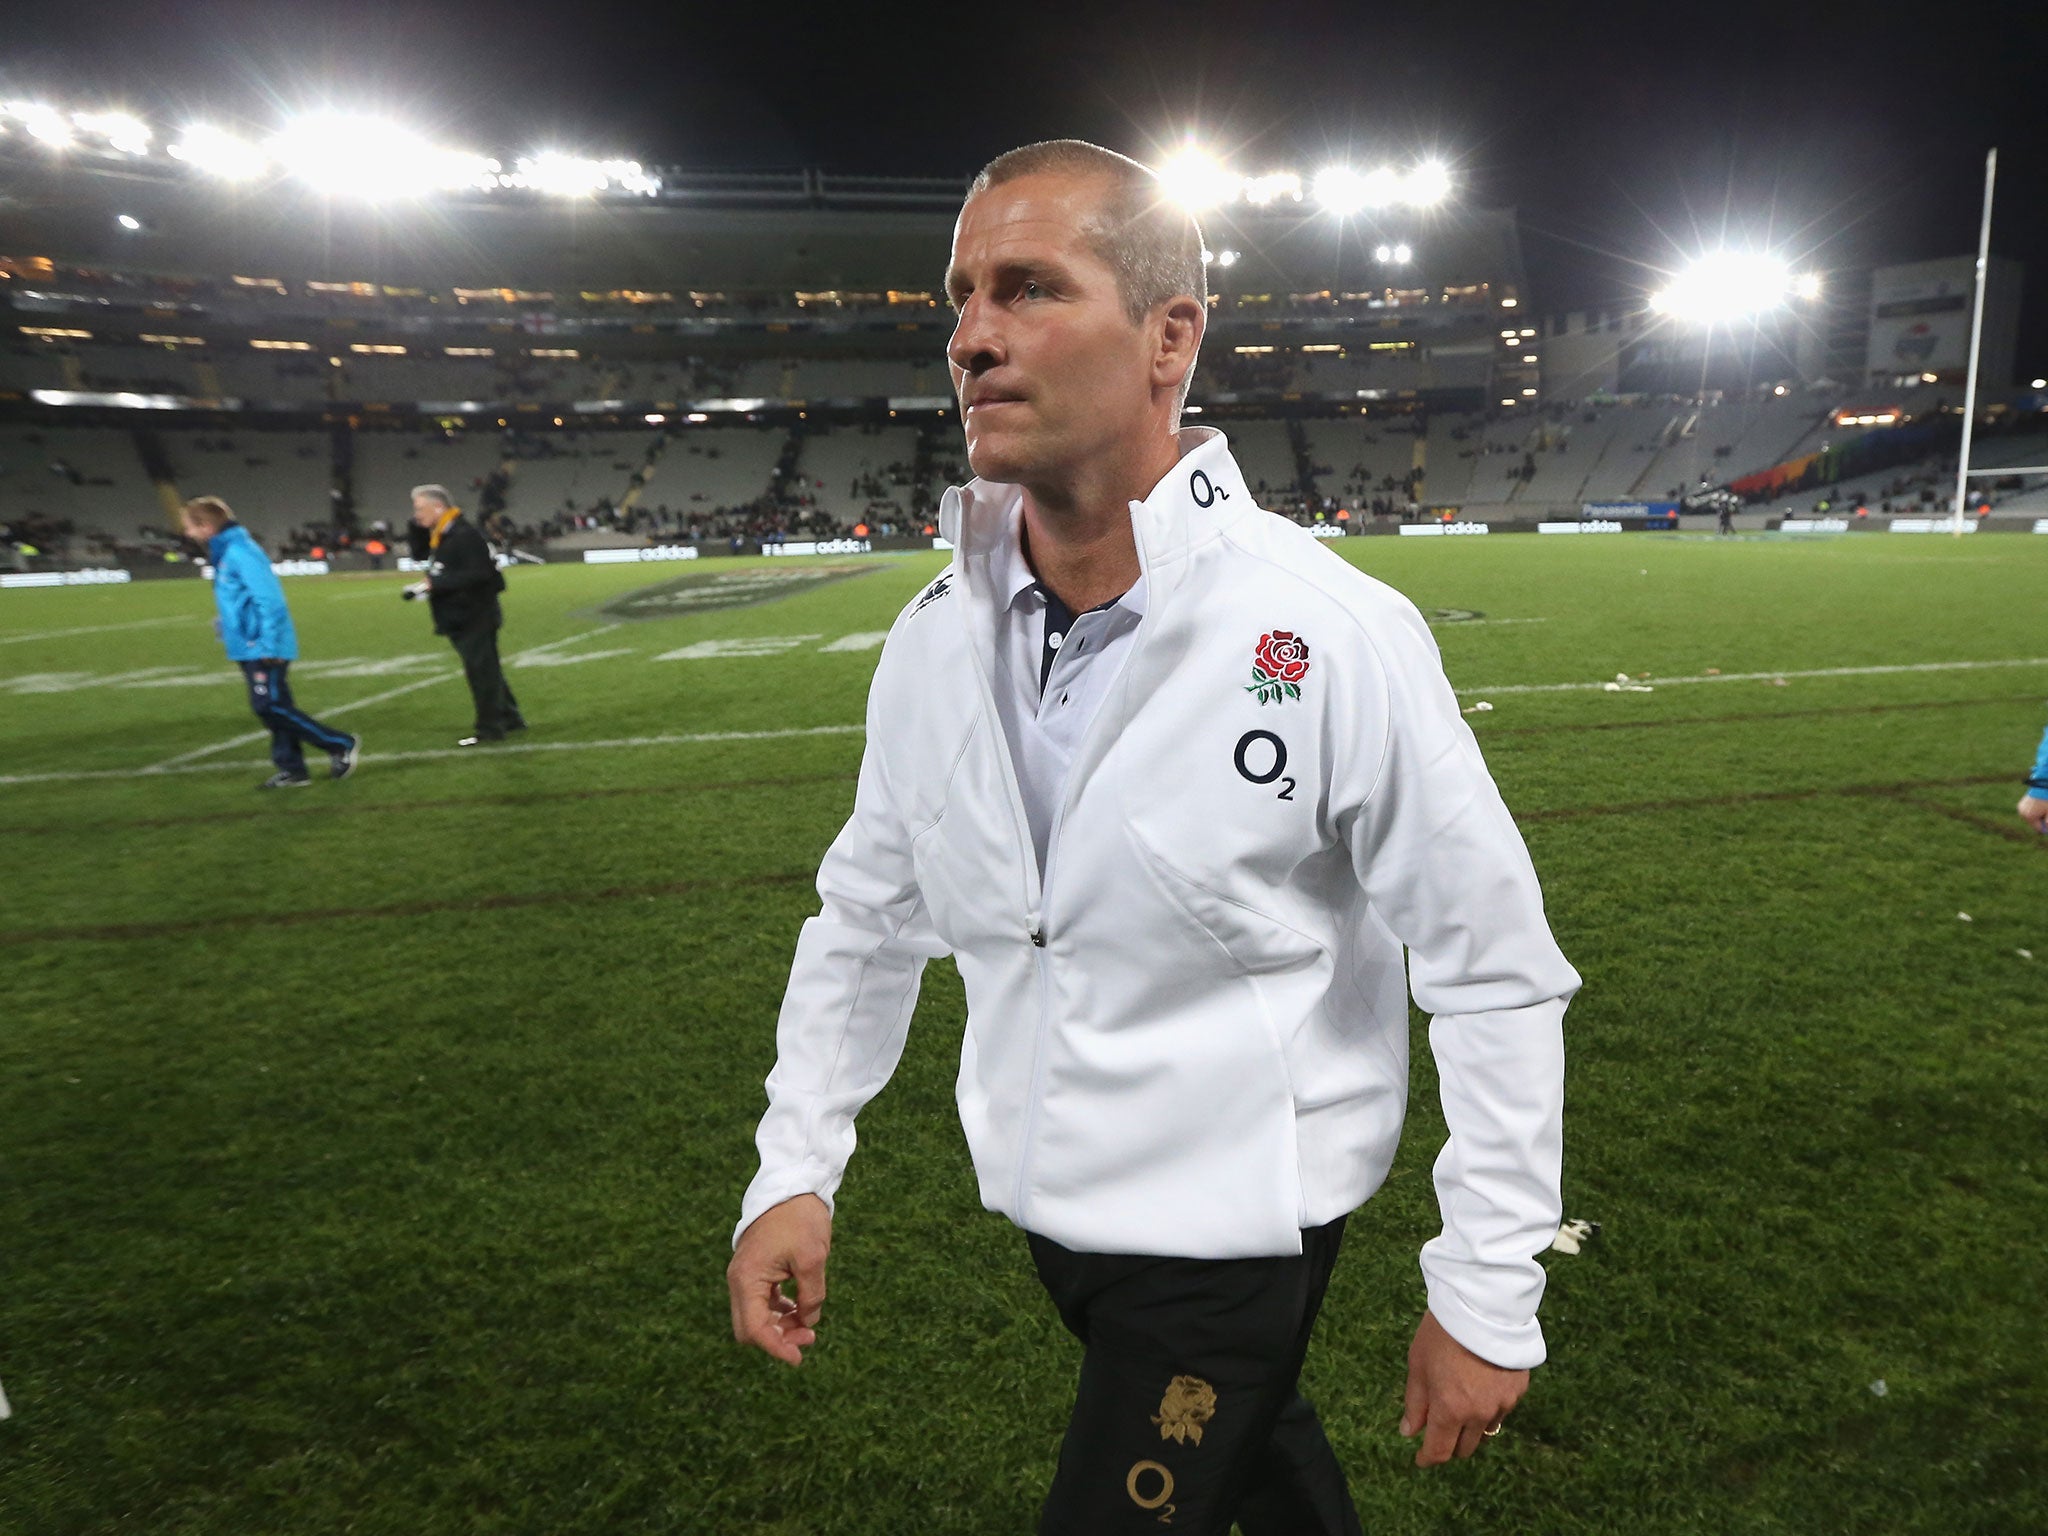 Stuart Lancaster walks off the Eden Park pitch after his England side lost to New Zealand 20-15